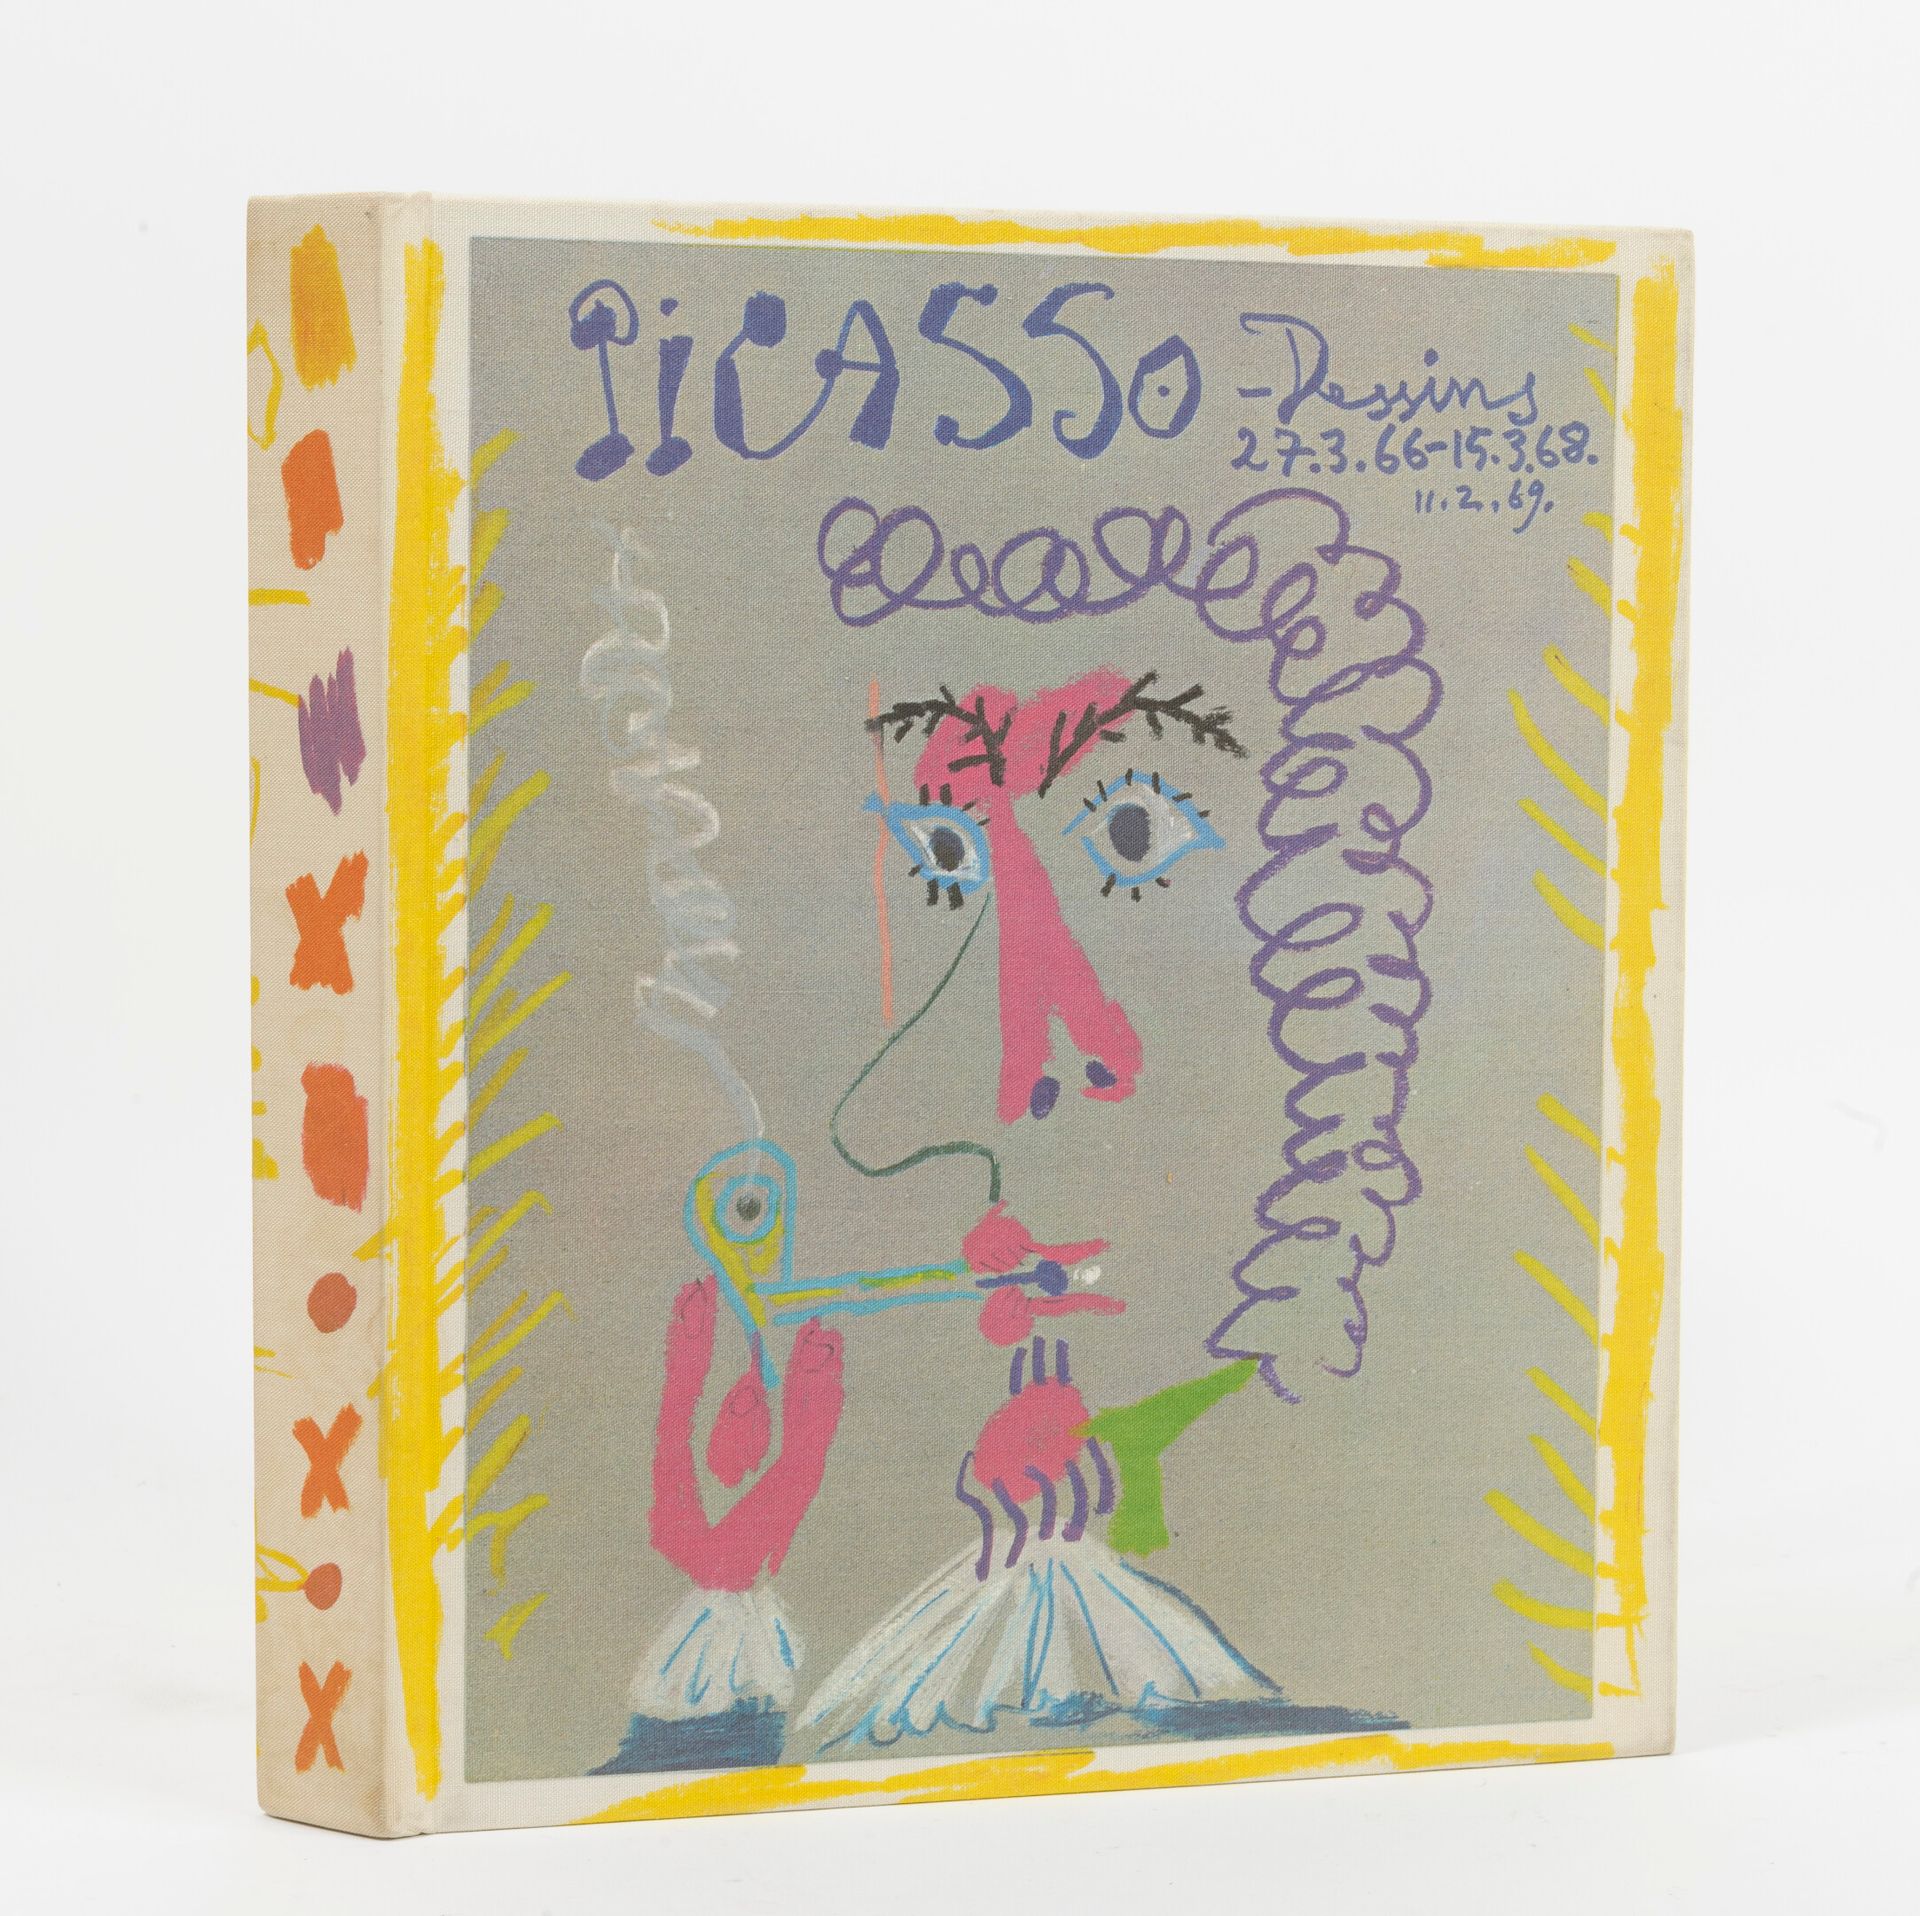 FELD, Charles Picasso, The Drawings from 27.3.66 to 15.3.68. 

Preface by René C&hellip;